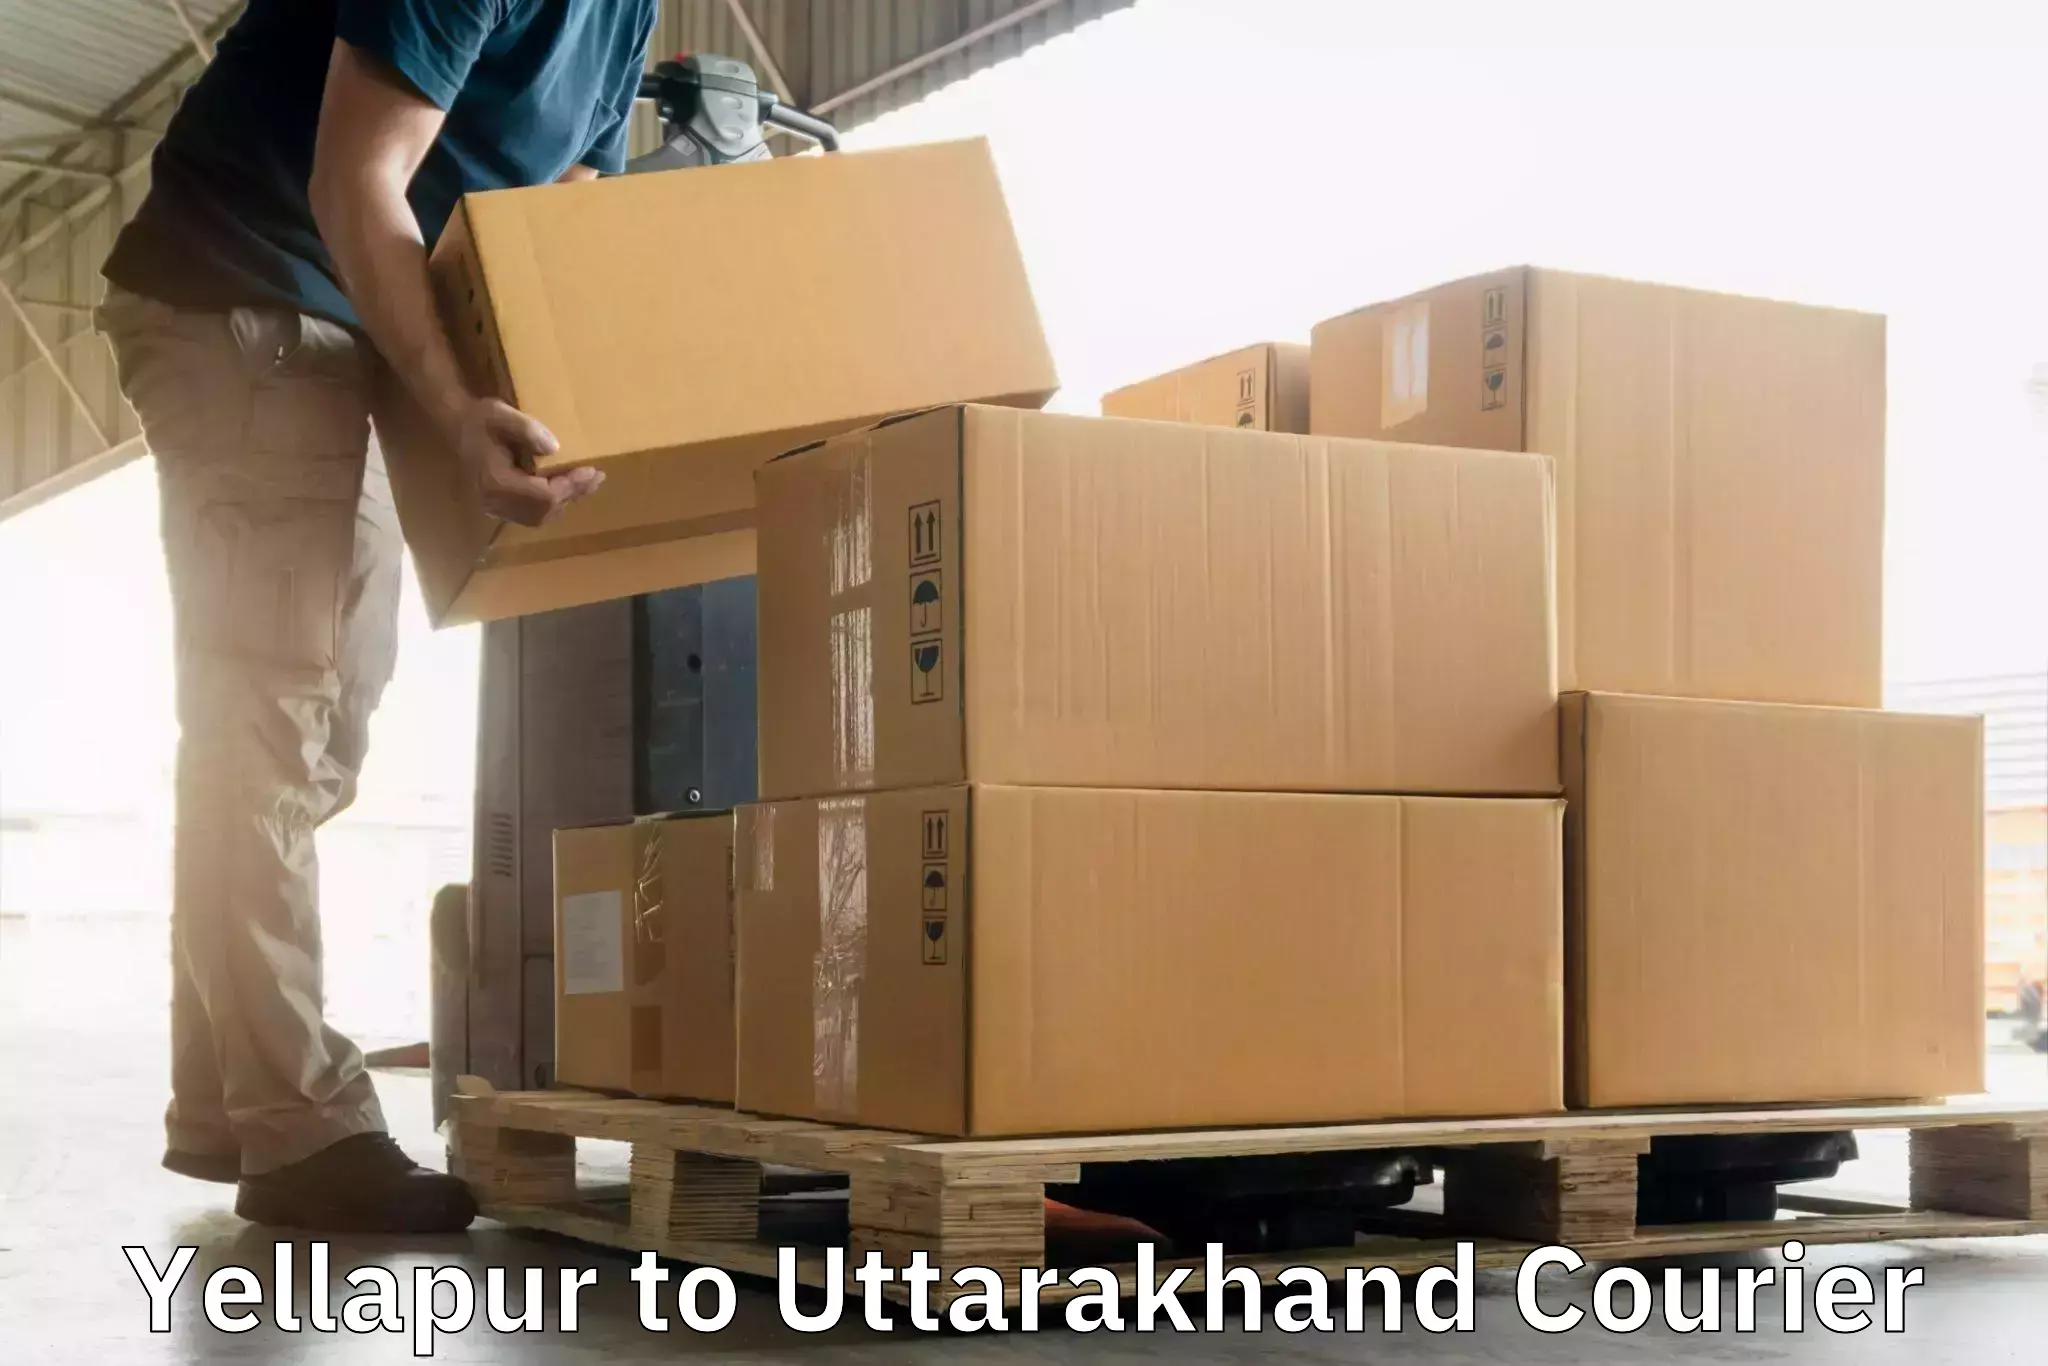 Efficient package consolidation Yellapur to Tehri Garhwal